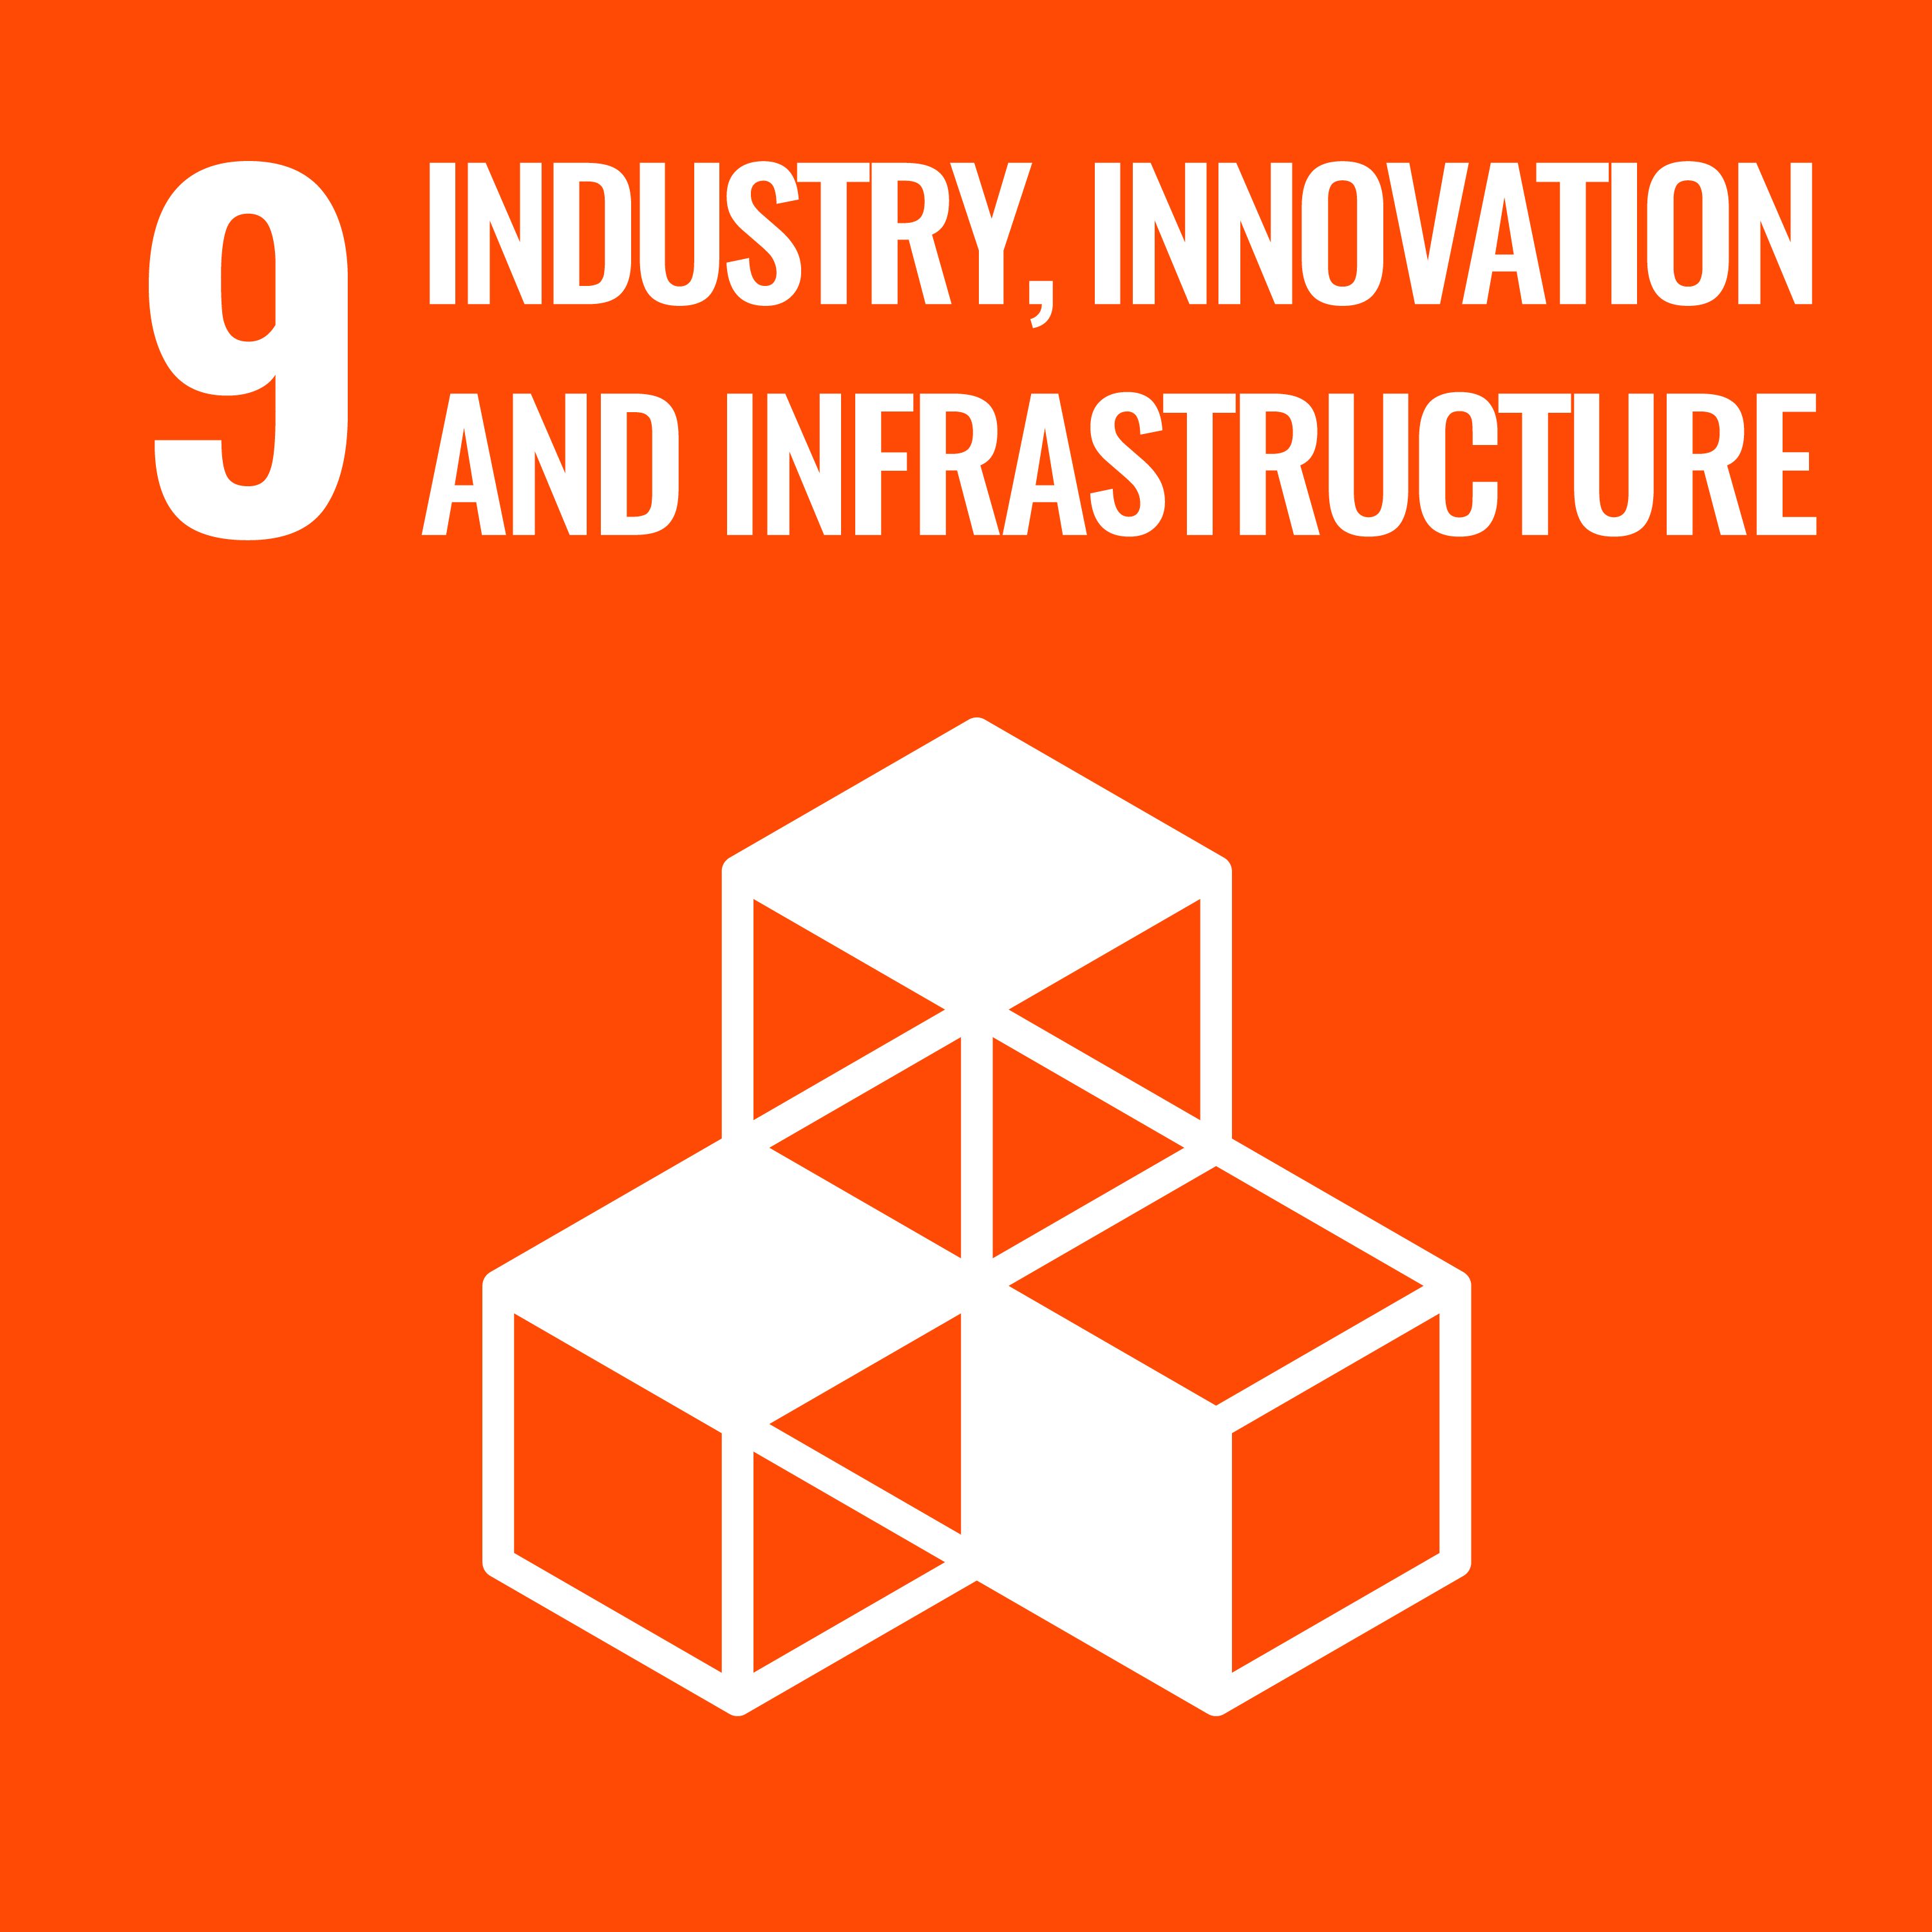 Industry, innovations and infrastructure